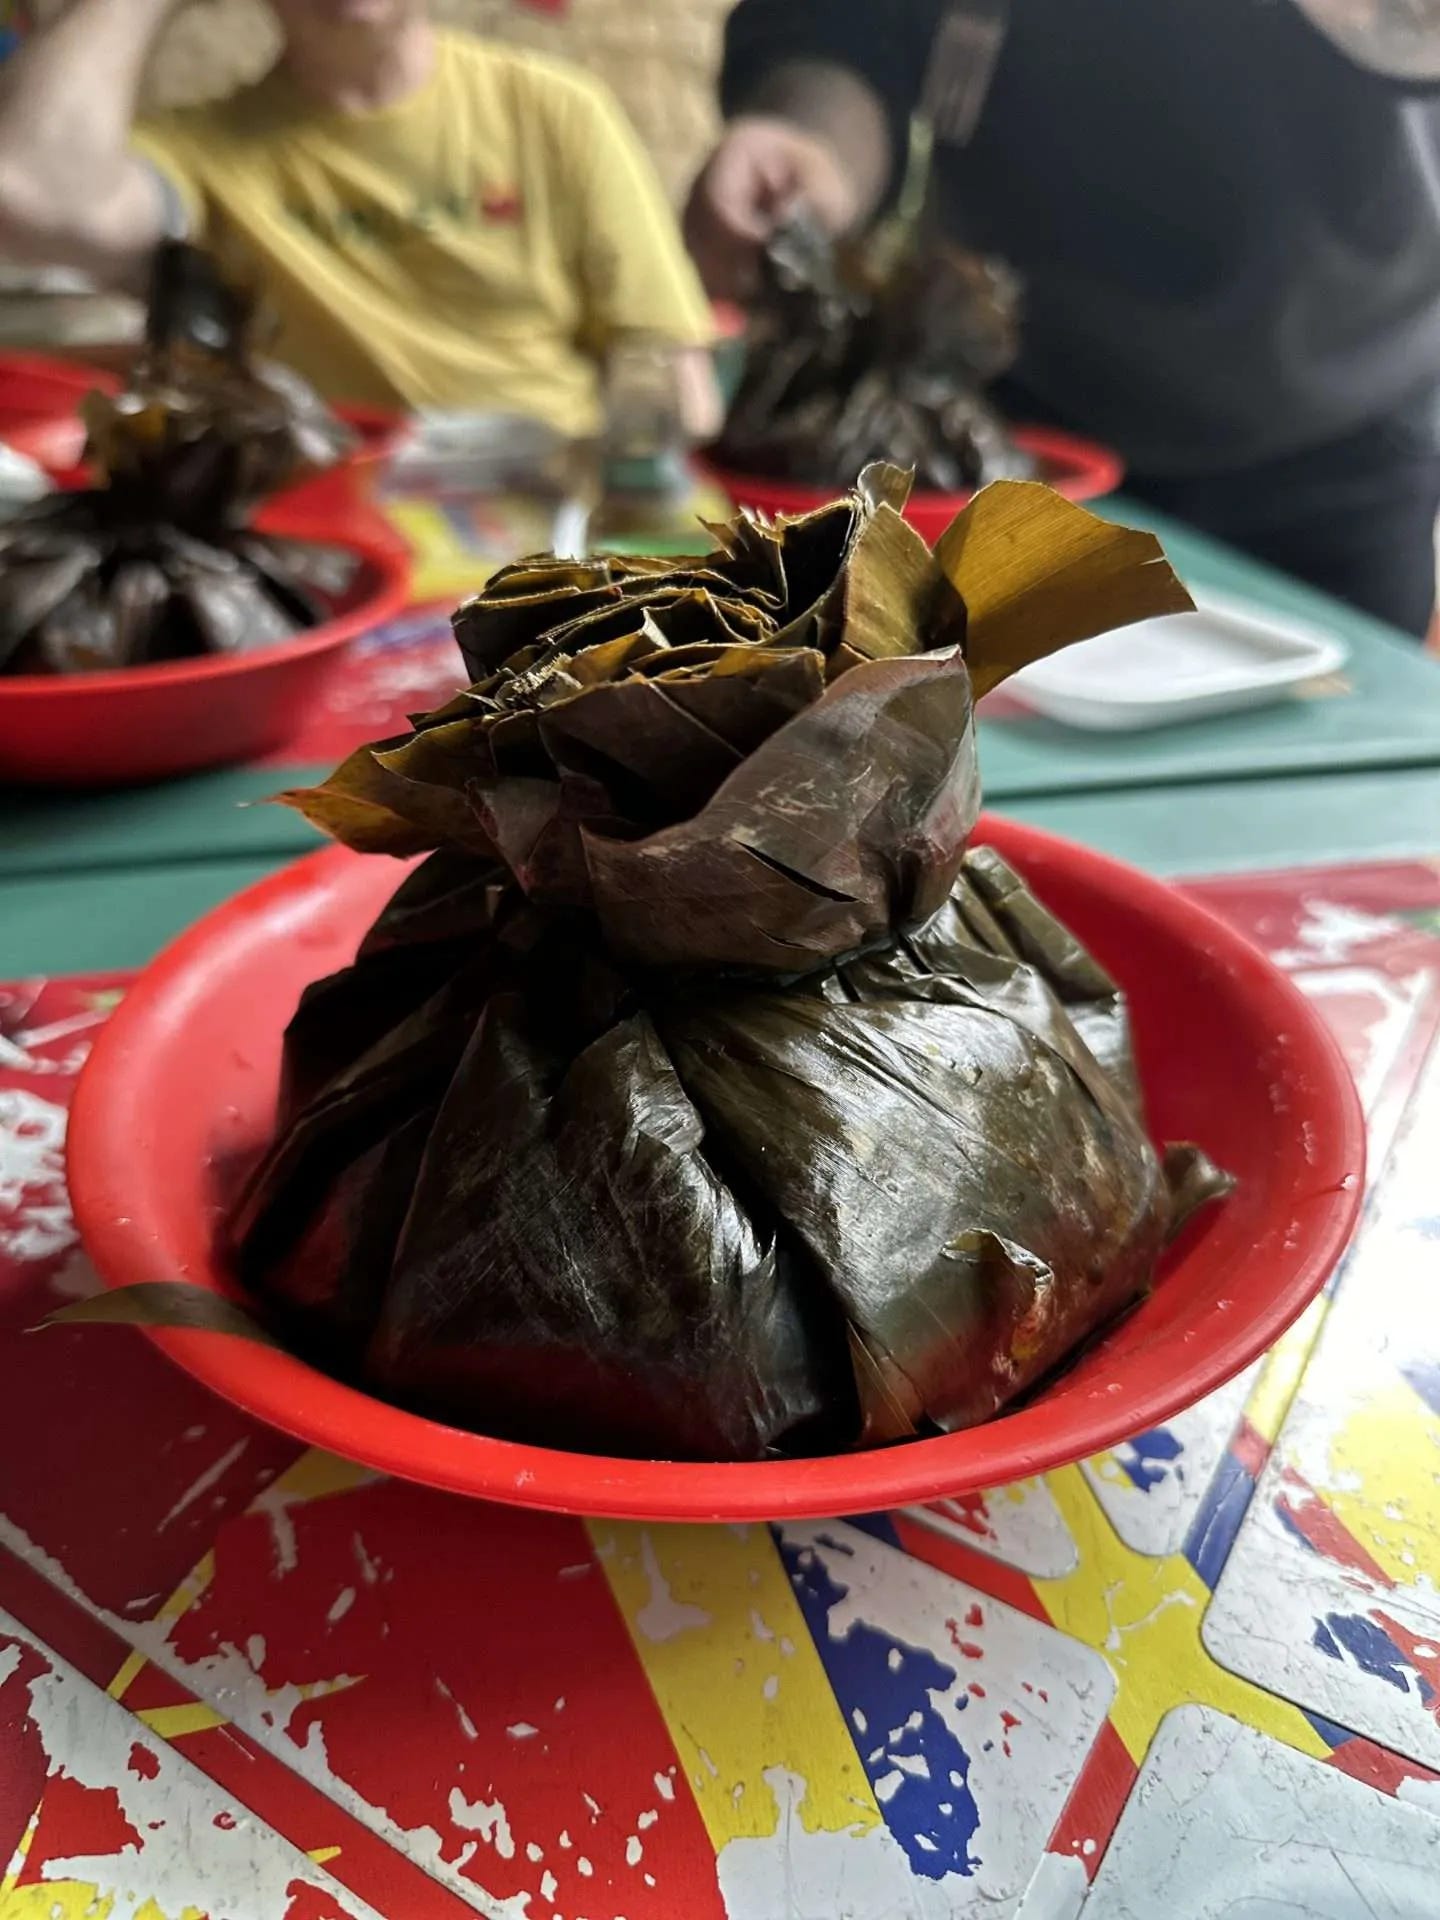 A food item wrapped in banana leaves is placed in a red bowl on a table alongside other similar dishes, exemplifying the art of making changes on the go. Two people are visible in the background, perhaps pivoting during full time travel to savor new culinary delights.